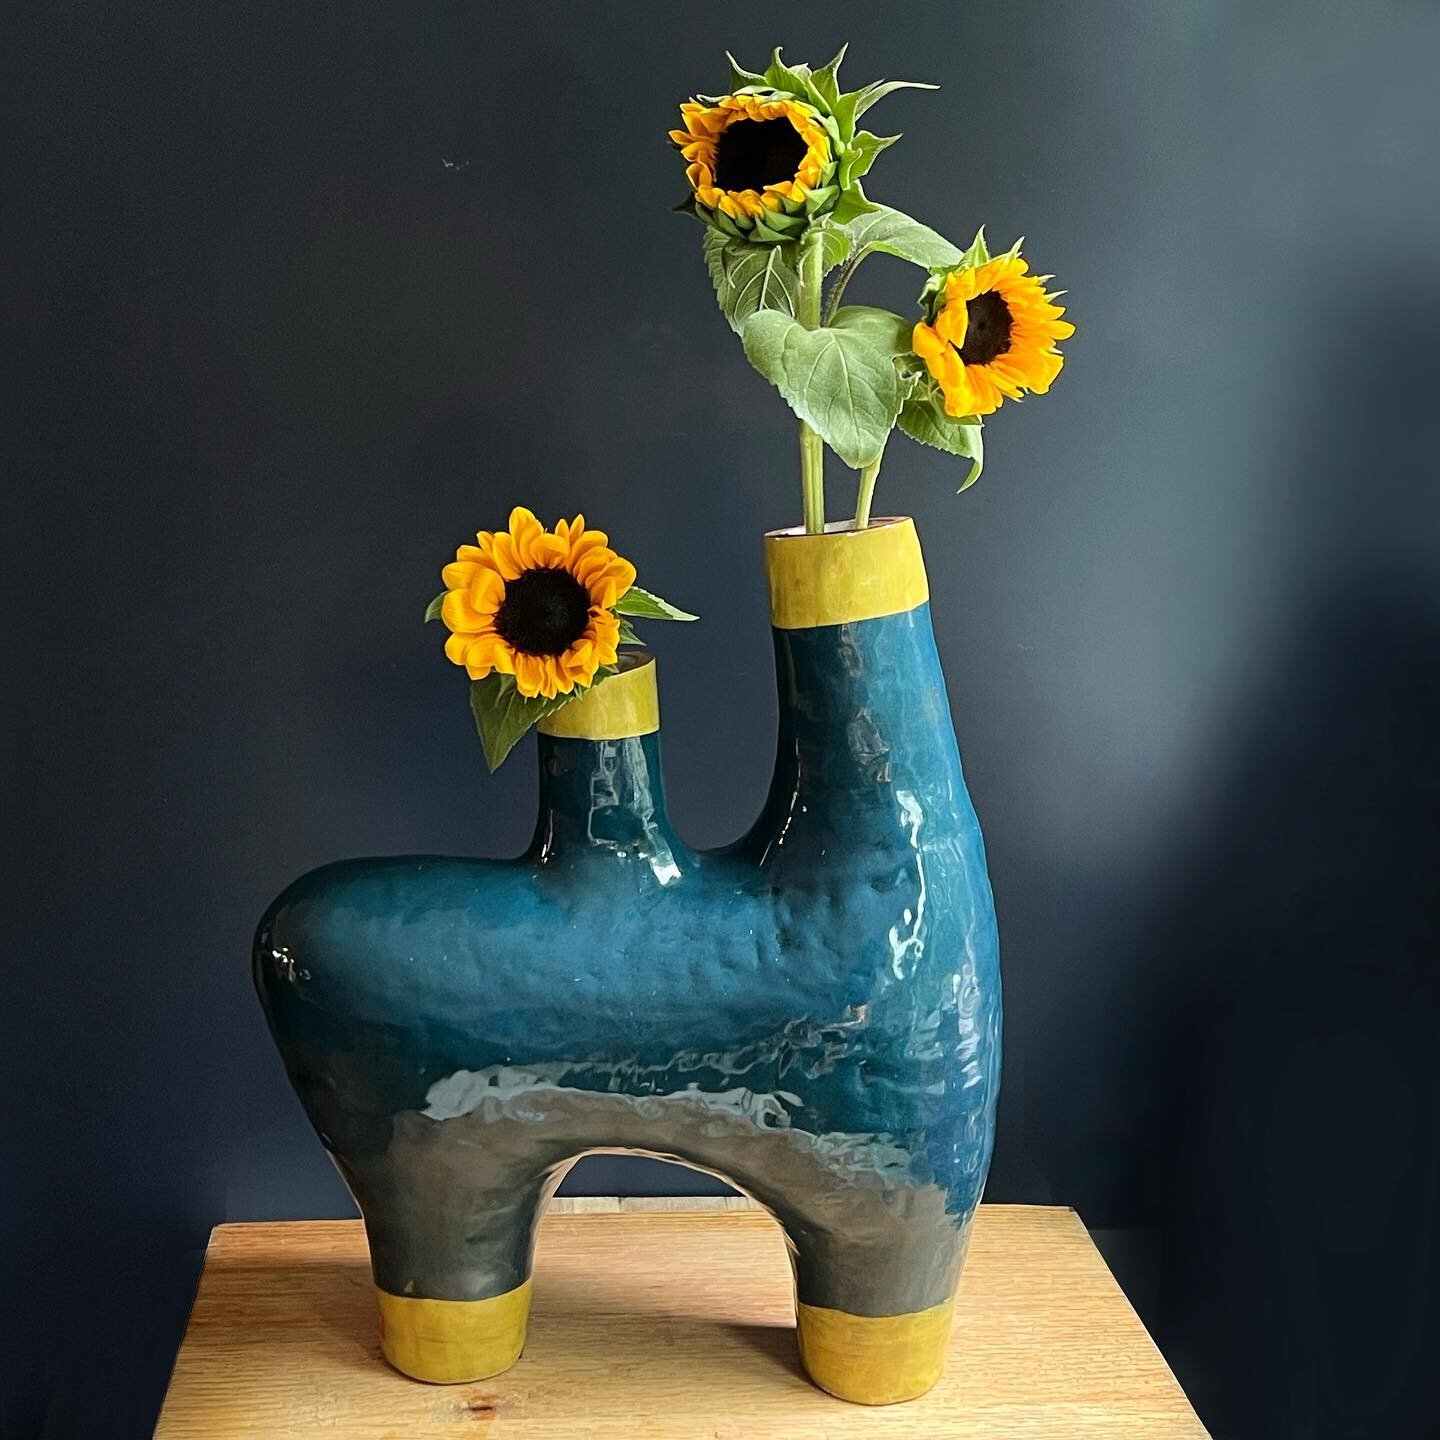 Please enjoy a beasty vase I made to challenge my hand building skills (inspired by @claycanoe). Particularly pleased with how the colors came out, especially paired with these beautiful flowers from our @marshviewfarm farm share. 🥰
.
.
#graphicclay